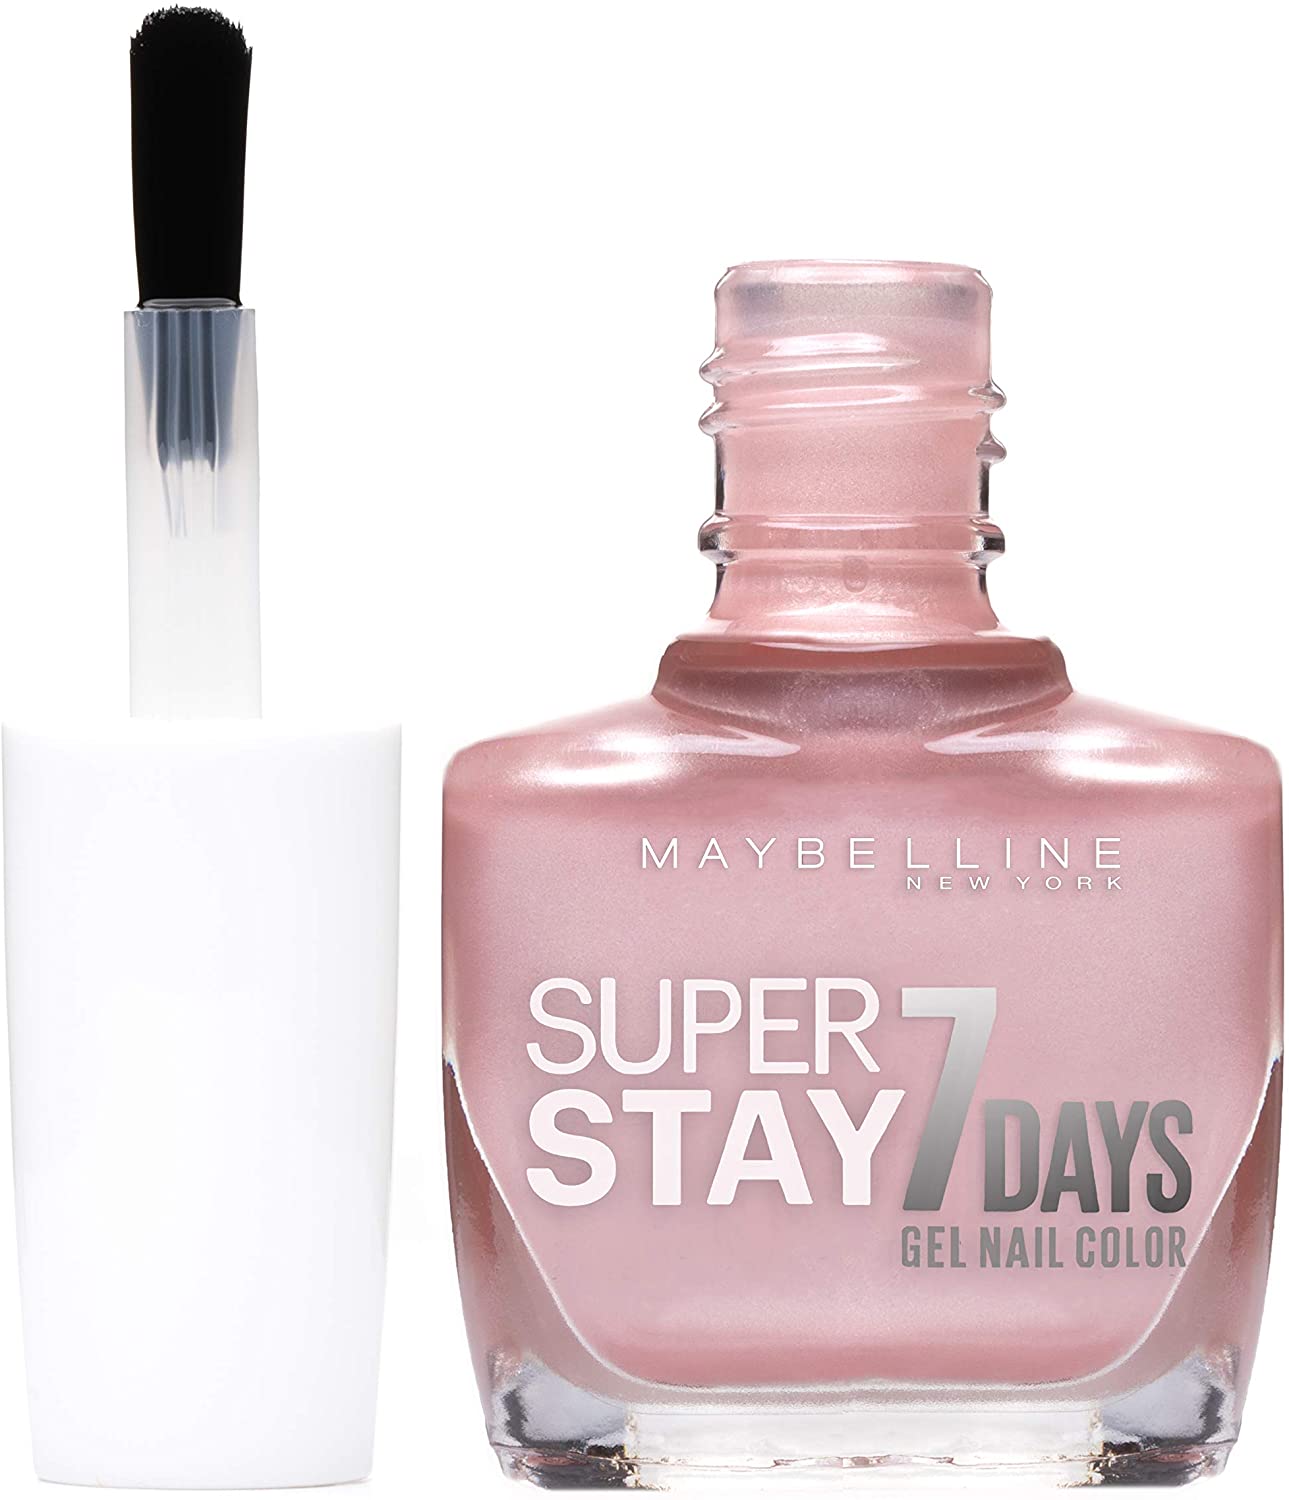 Maybelline SuperStay 7 Day Nail Polish 78 Porcelain